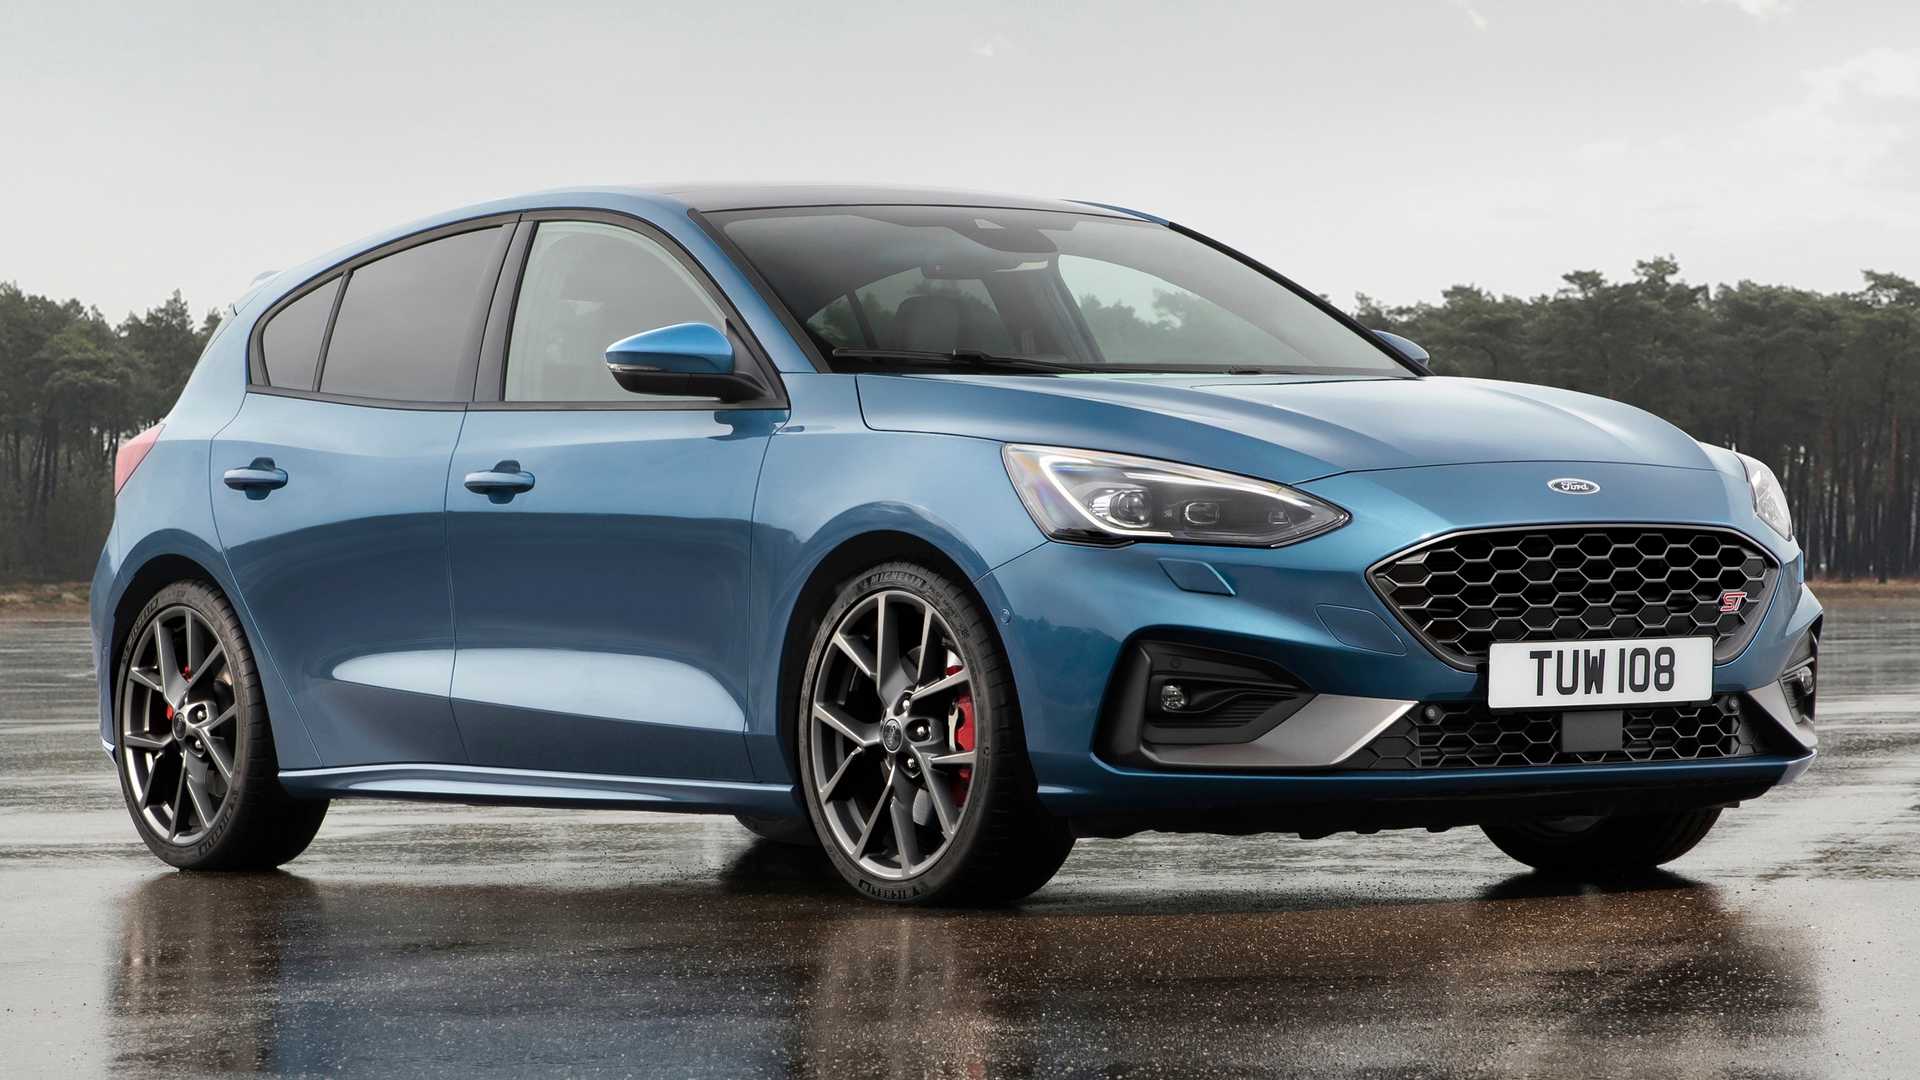 Ford Focus ST launch in India soon